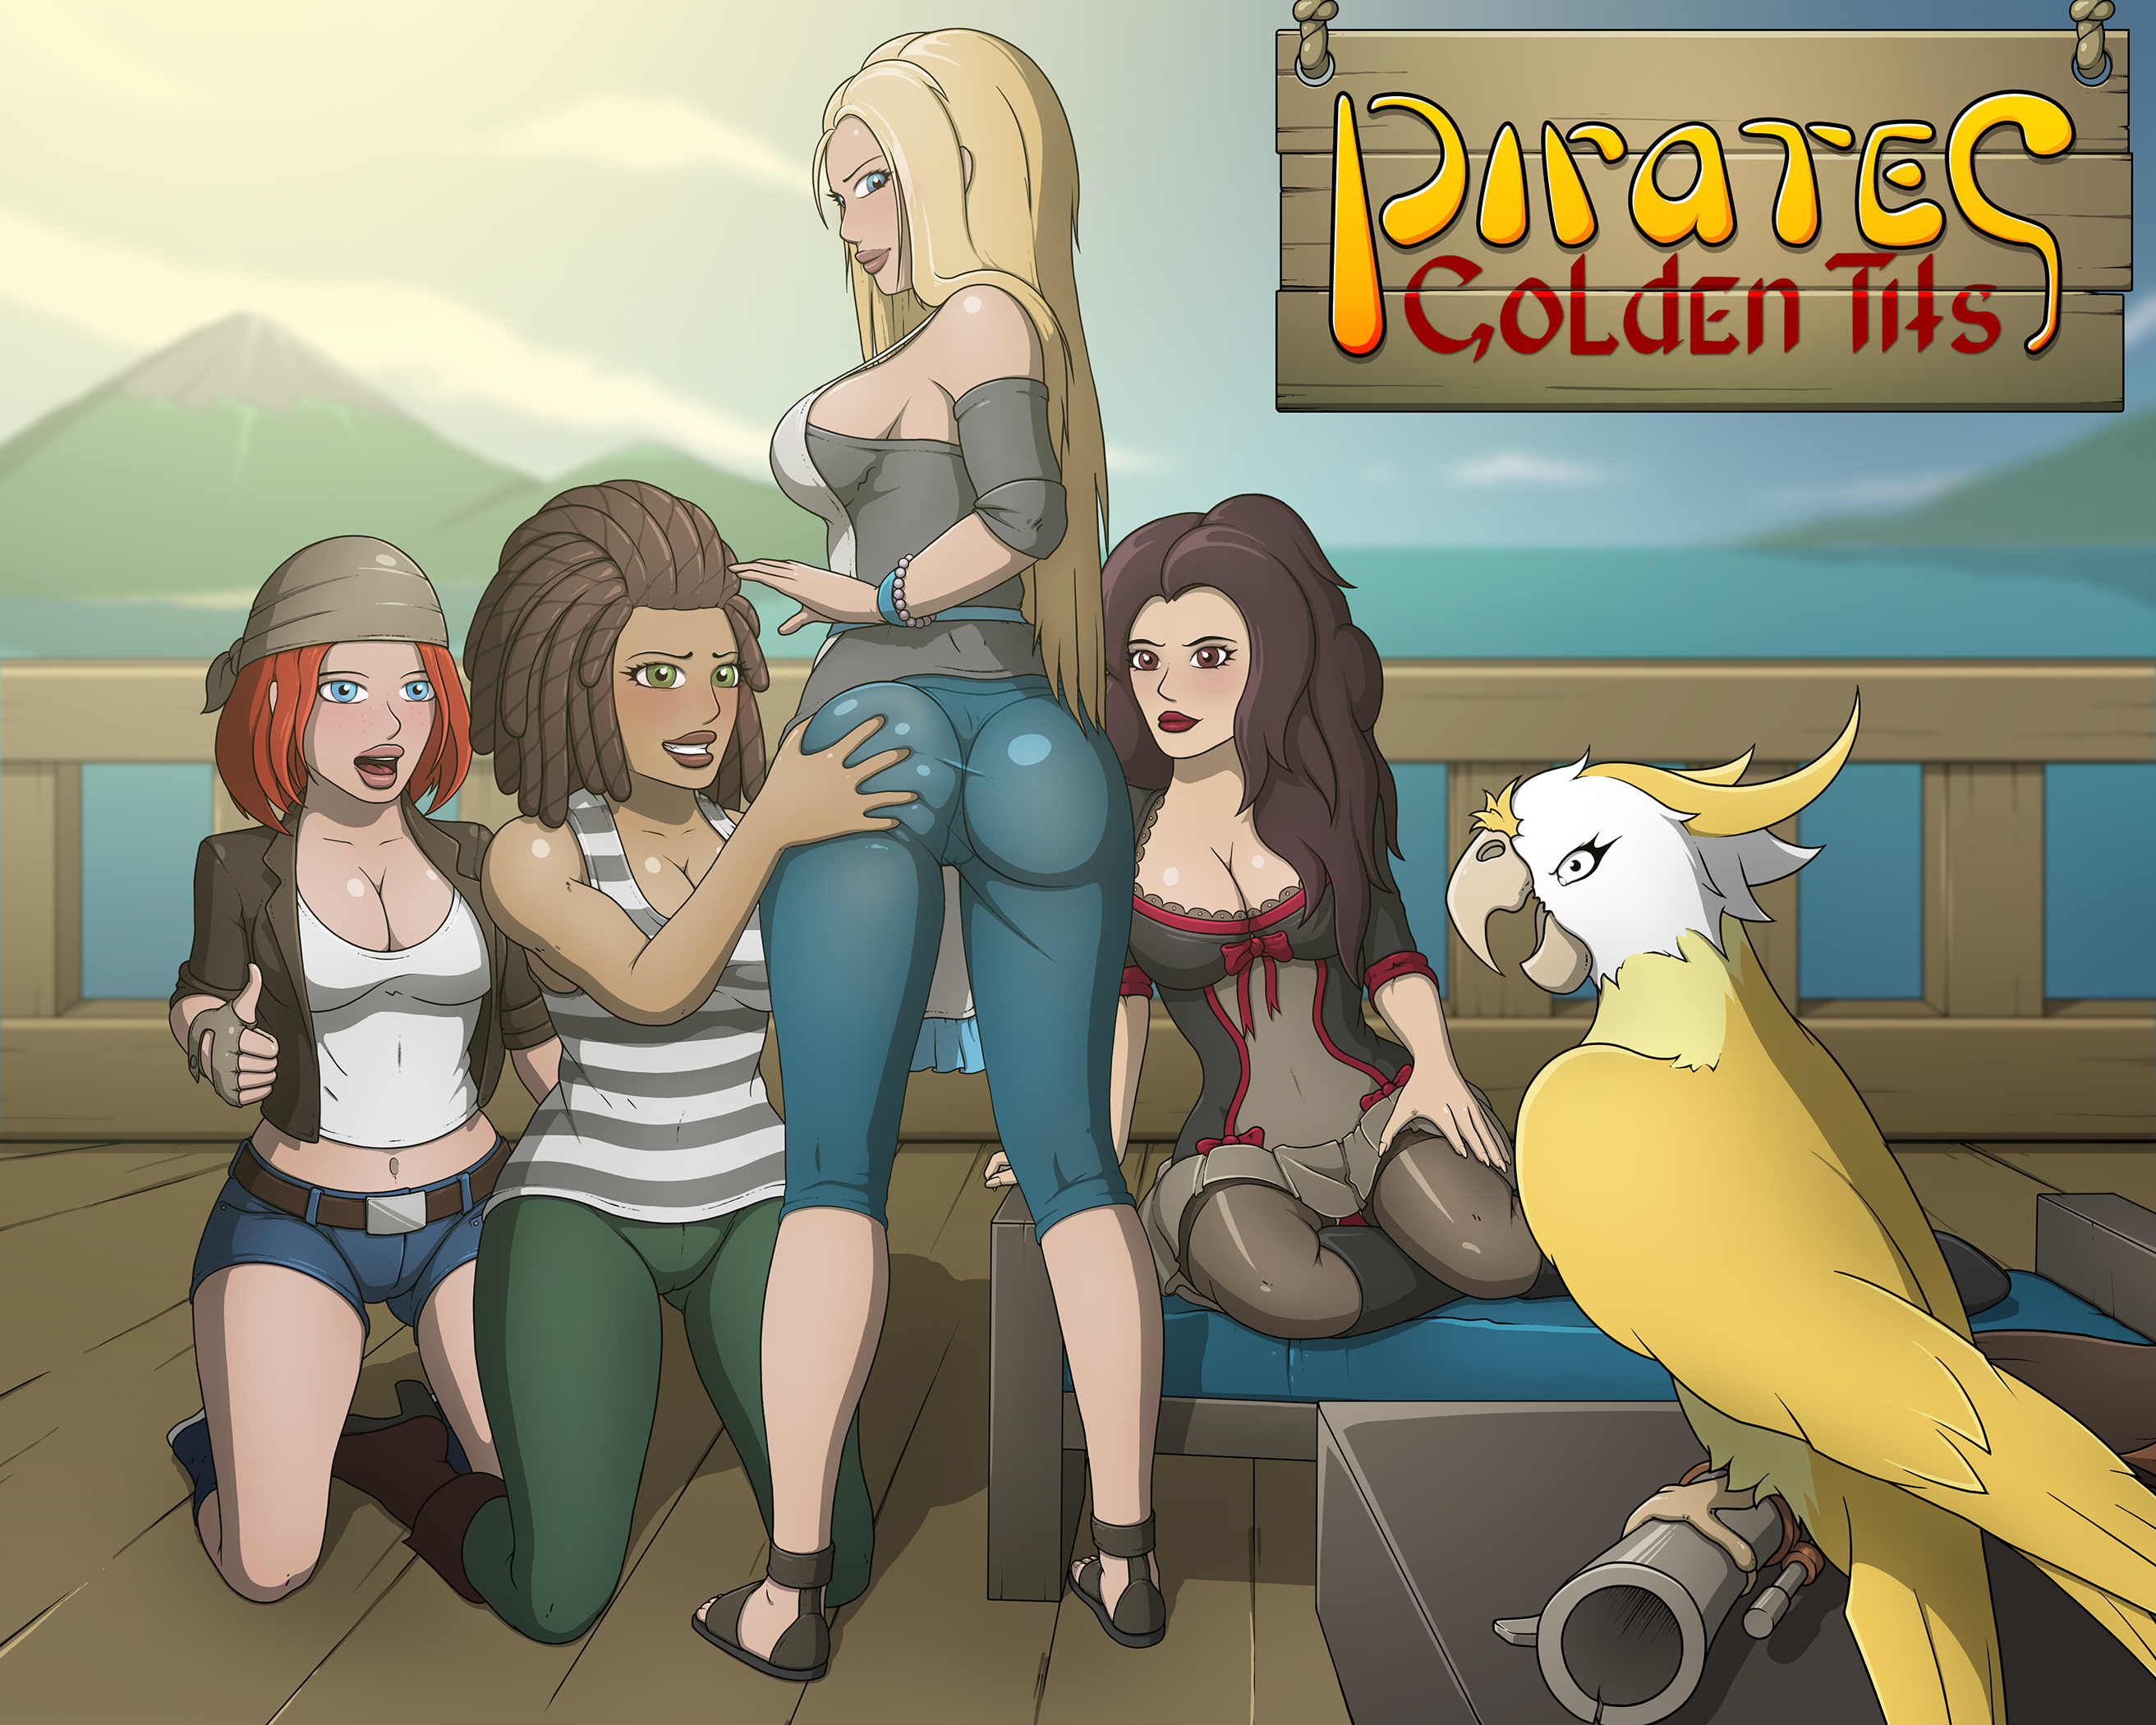 Top 4 Adult Games! - Pirates : Golden Tits (0.23) FIX [NSFW] 18+ by Hot  Bunny